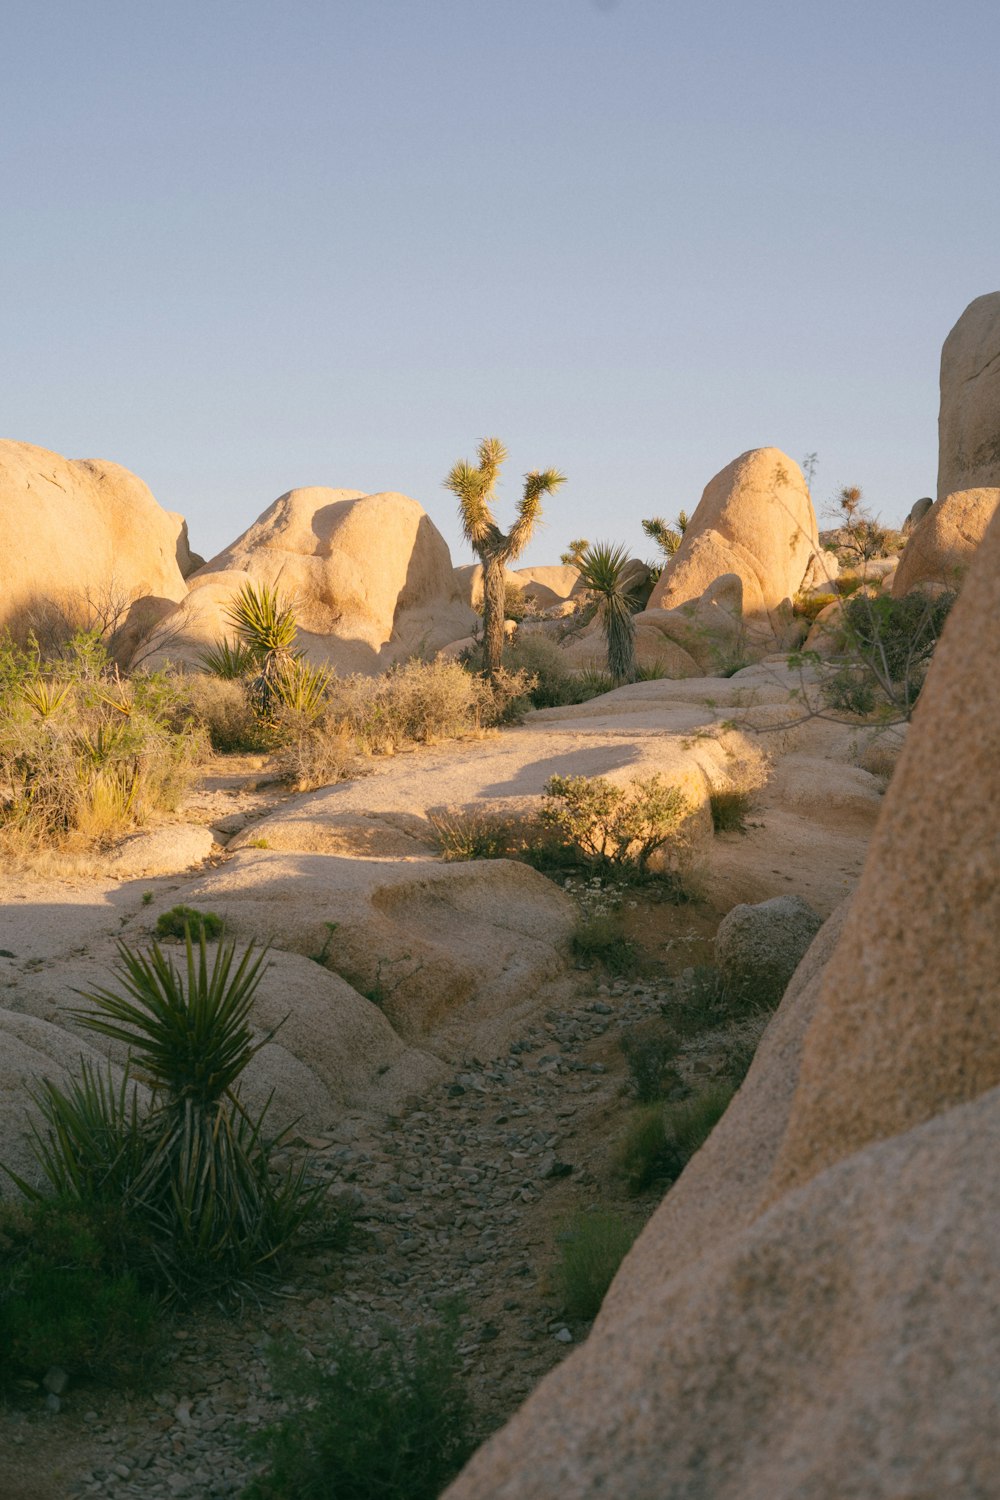 a dirt road surrounded by large rocks and palm trees